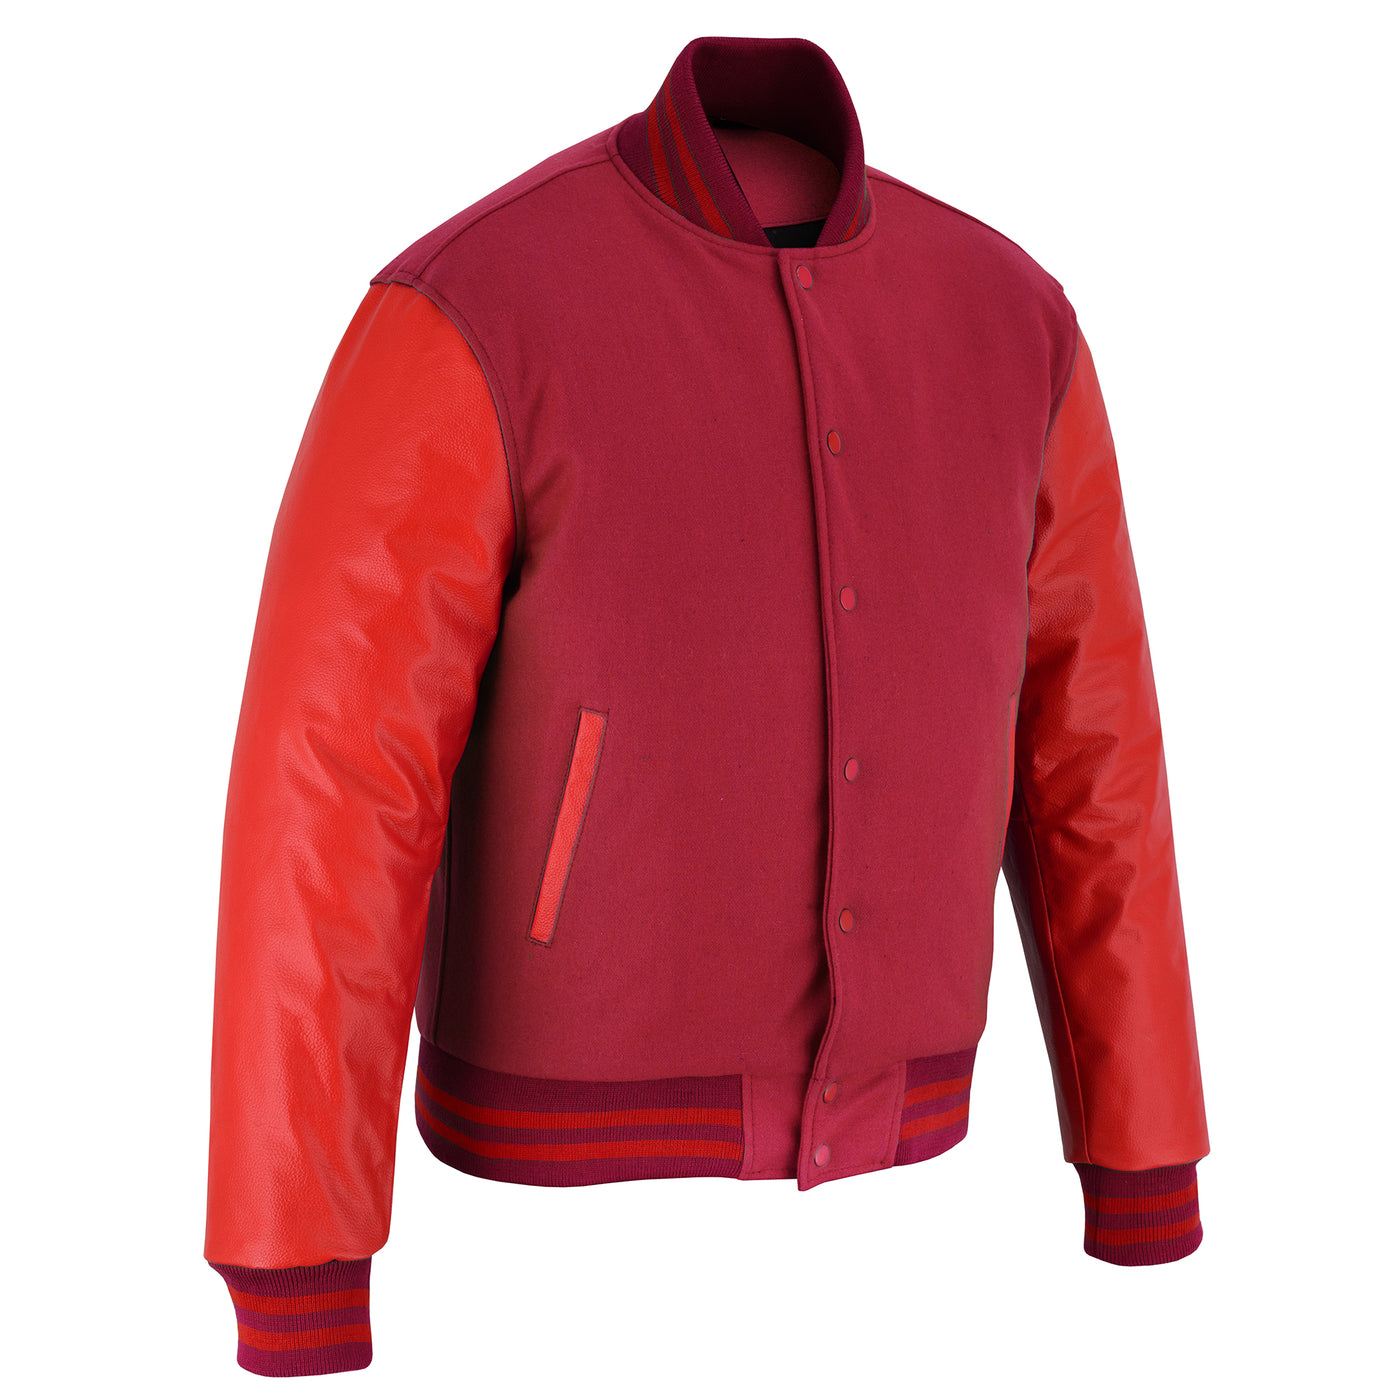 Classic Varsity Letterman Jacket Maroon Wool with Red Genuine Leather Sleeves and trims